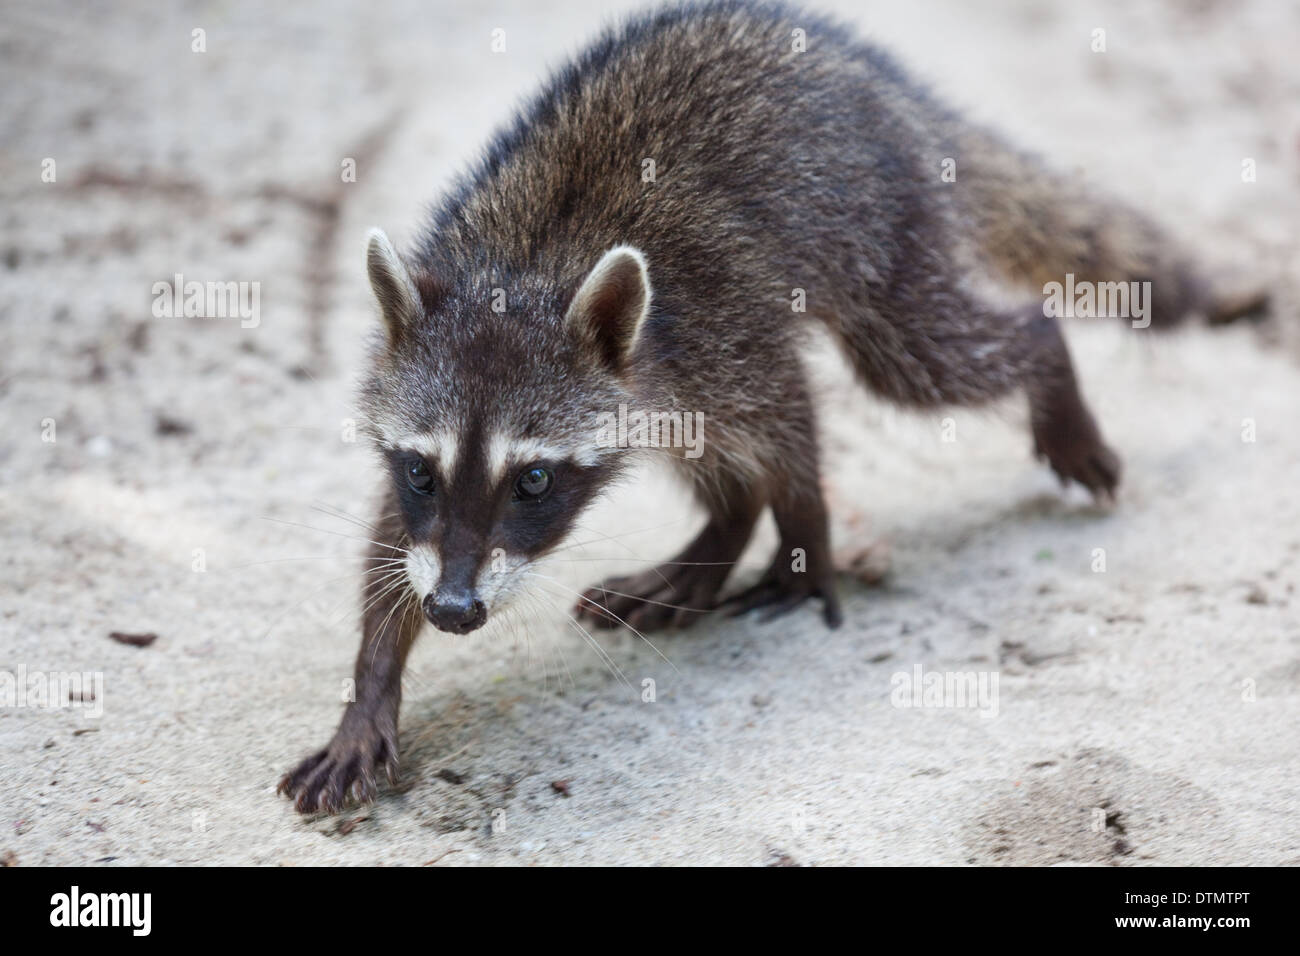 Crab-eating Raccoon (Procyon cancrivorus). Youngster on the run. Manuel Antonio National Park. Costa Rica. Central America. Stock Photo